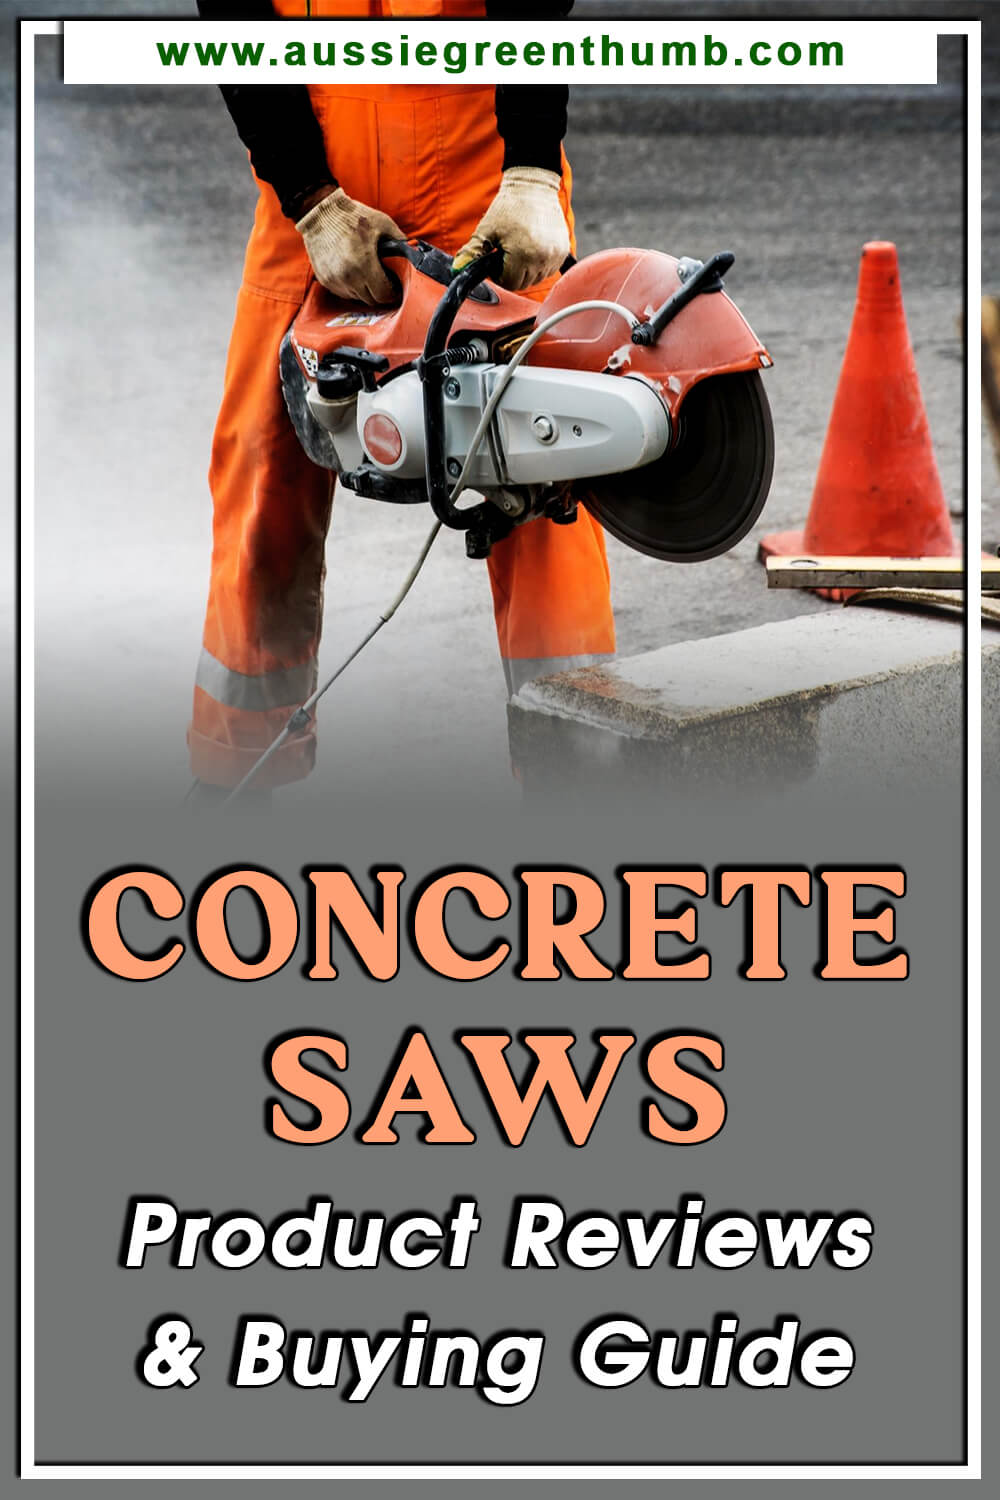 Best Concrete Saws Product Reviews and Buying Guide